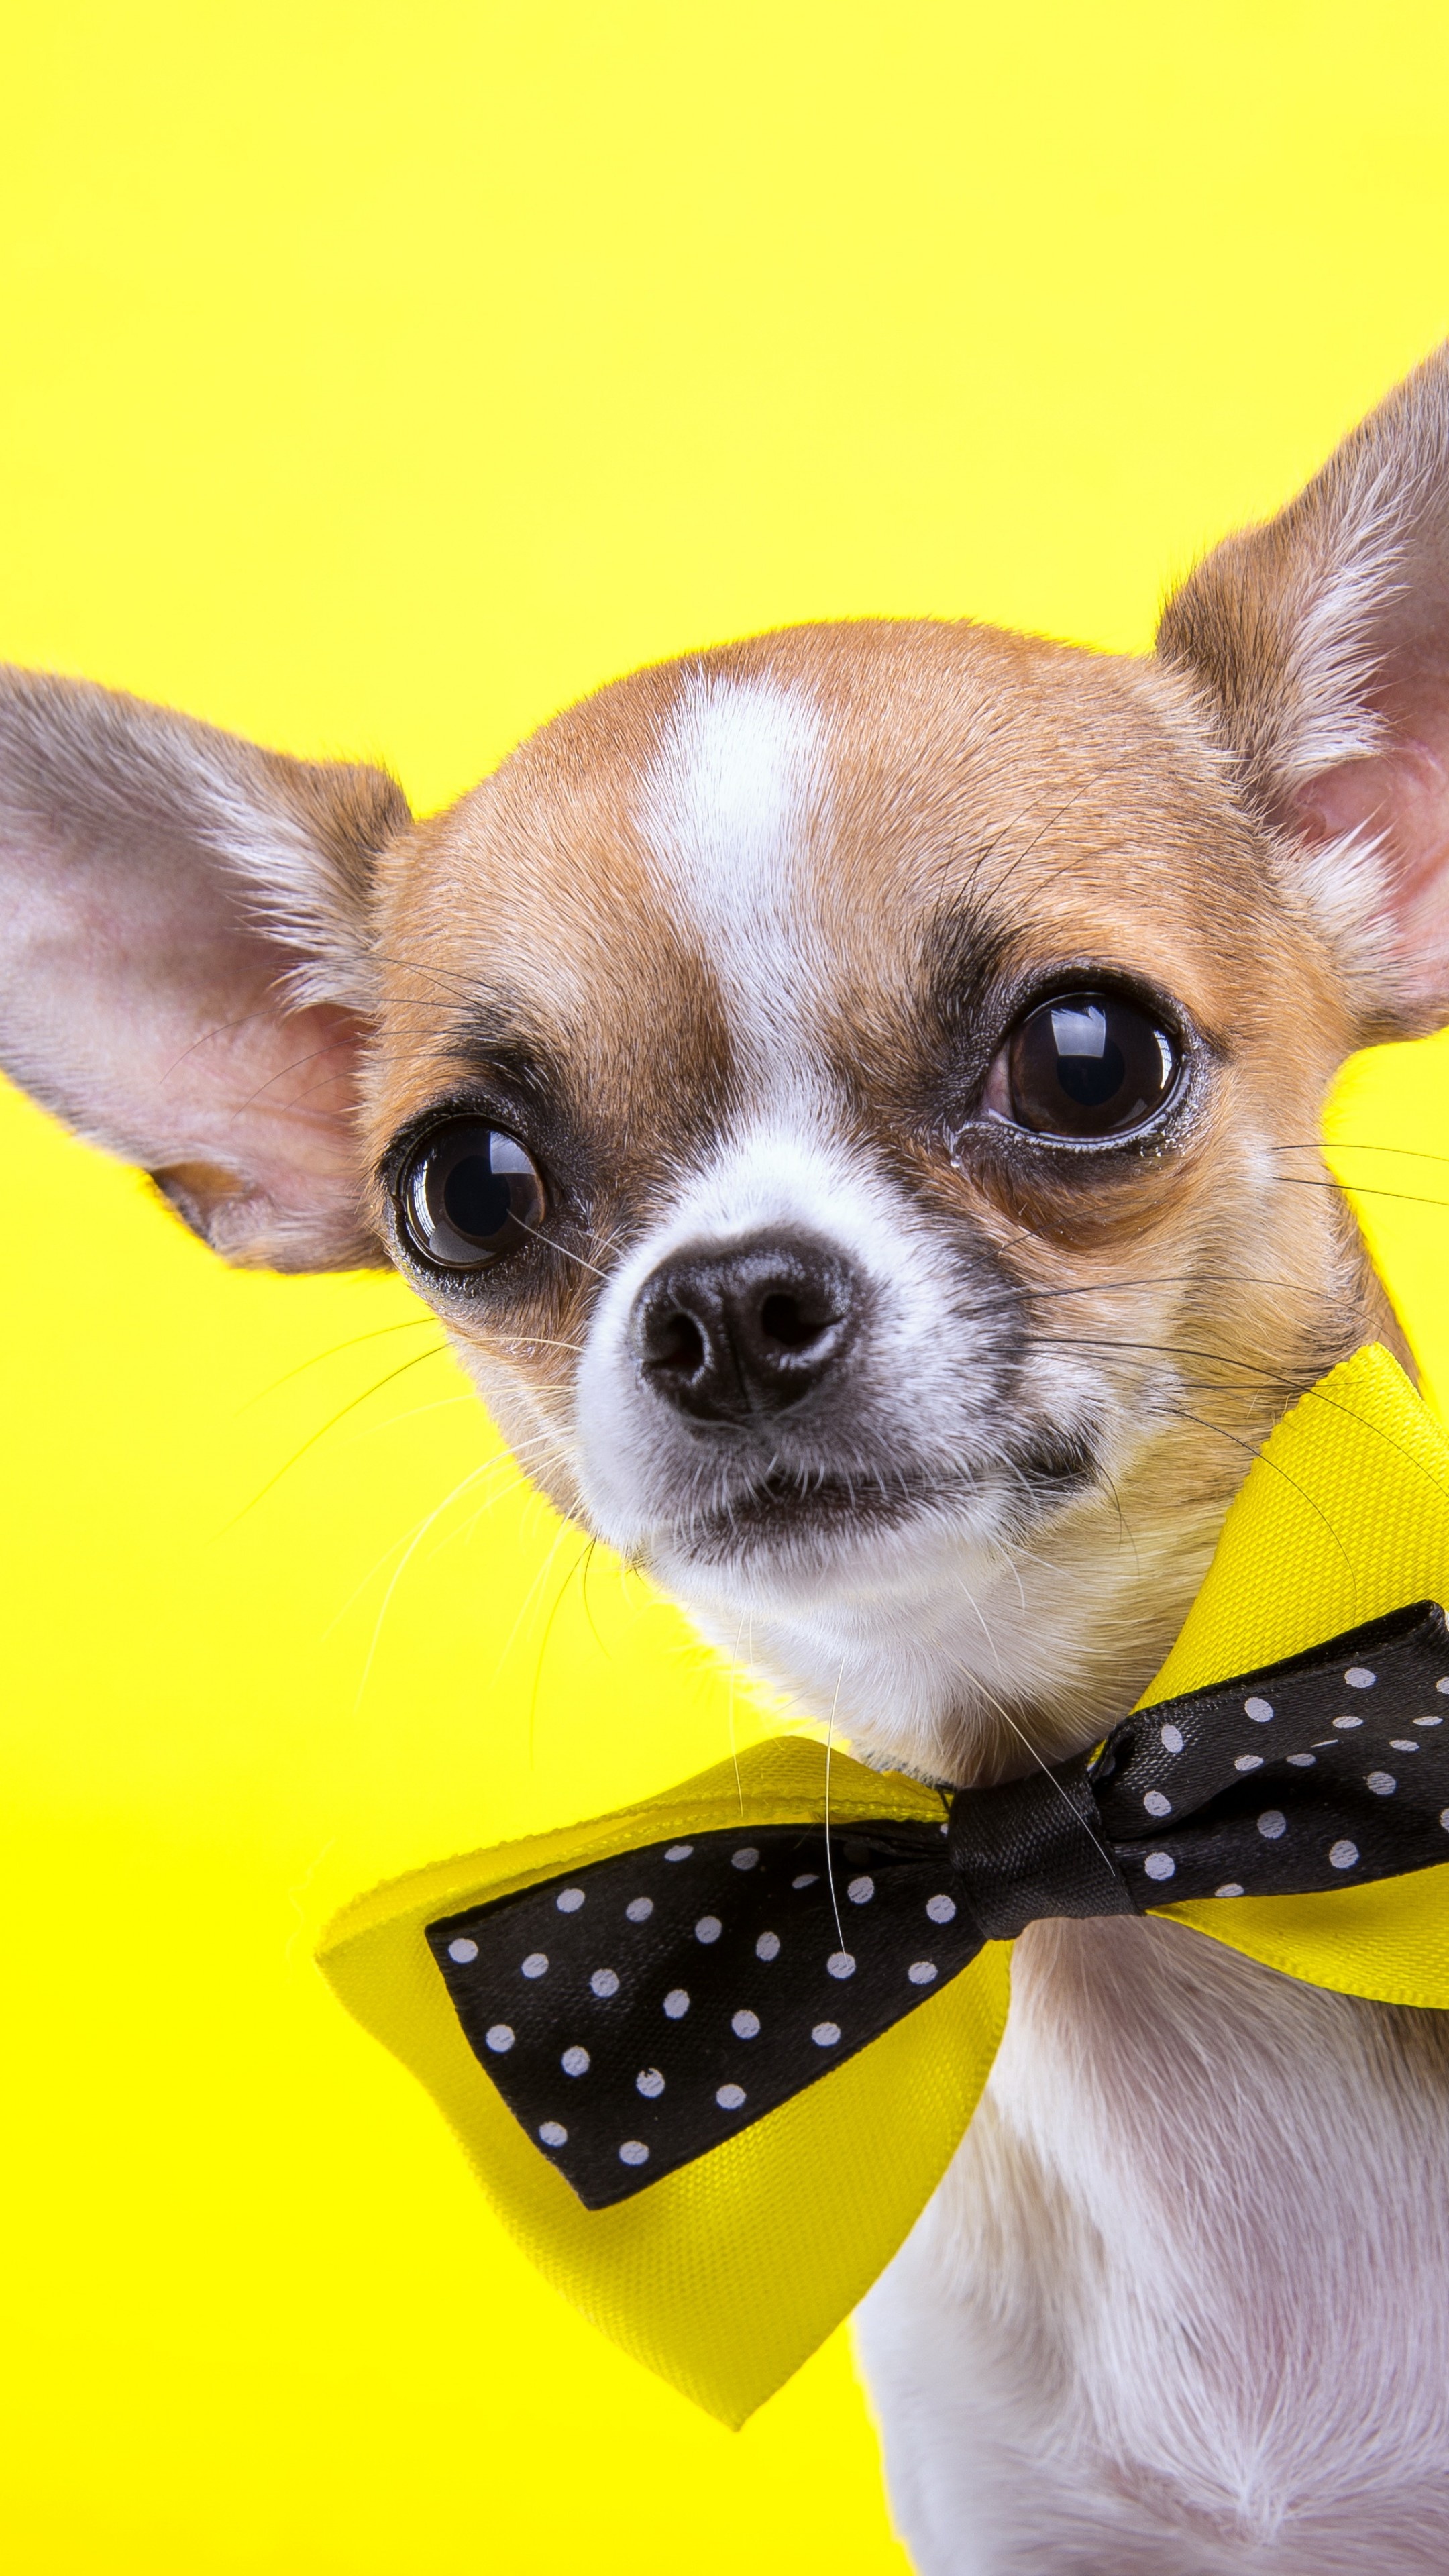 Chihuahua dog in yellow, Cute and playful, Stunning wallpaper, Beautiful imagery, 2160x3840 4K Phone